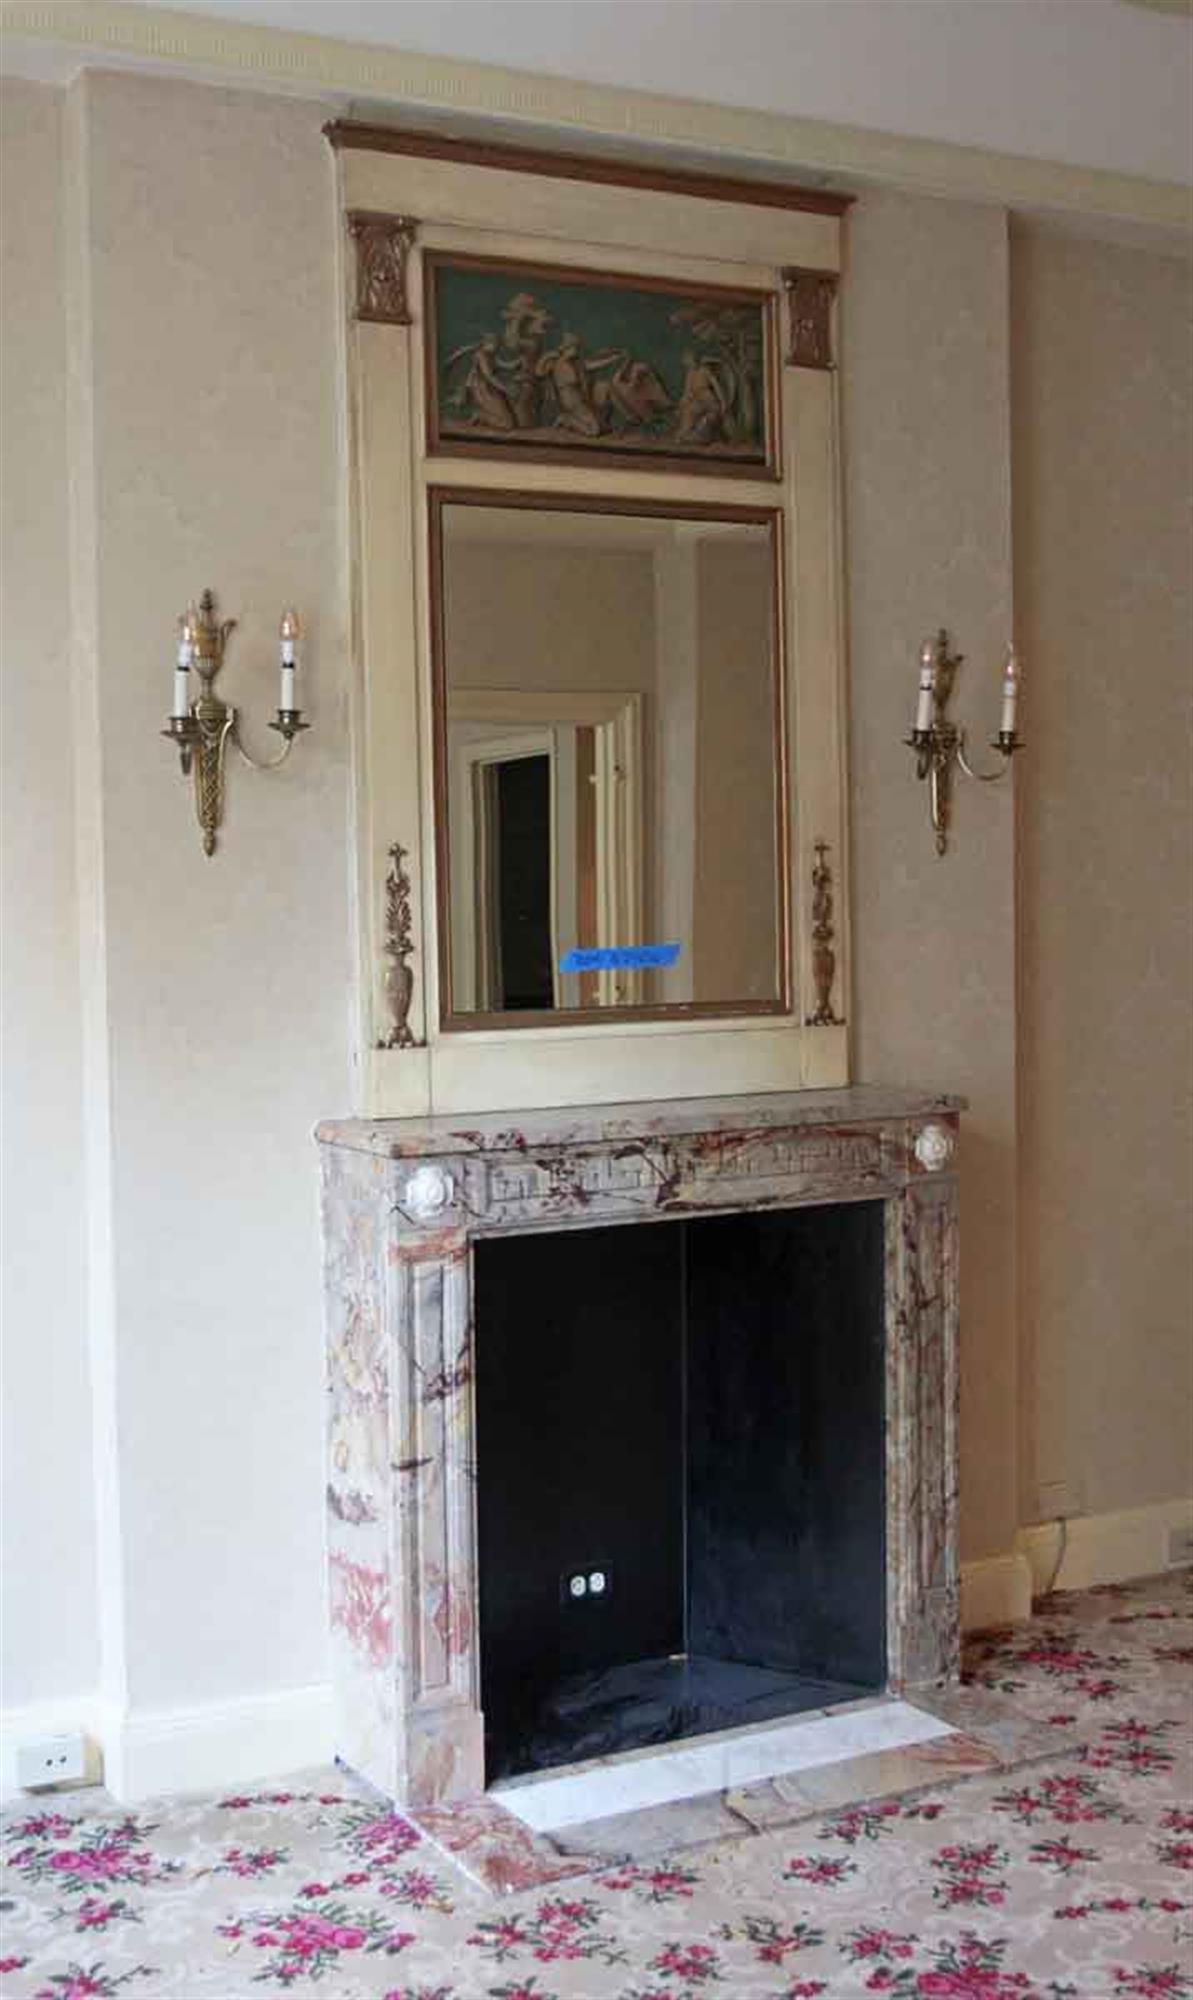 White wood over mantel mirror with decorative carvings and green and gold figural details. From France. Original to Room 700M of the NYC Waldorf Astoria Hotel. Waldorf Astoria authenticity card included with your purchase. This can be seen at our